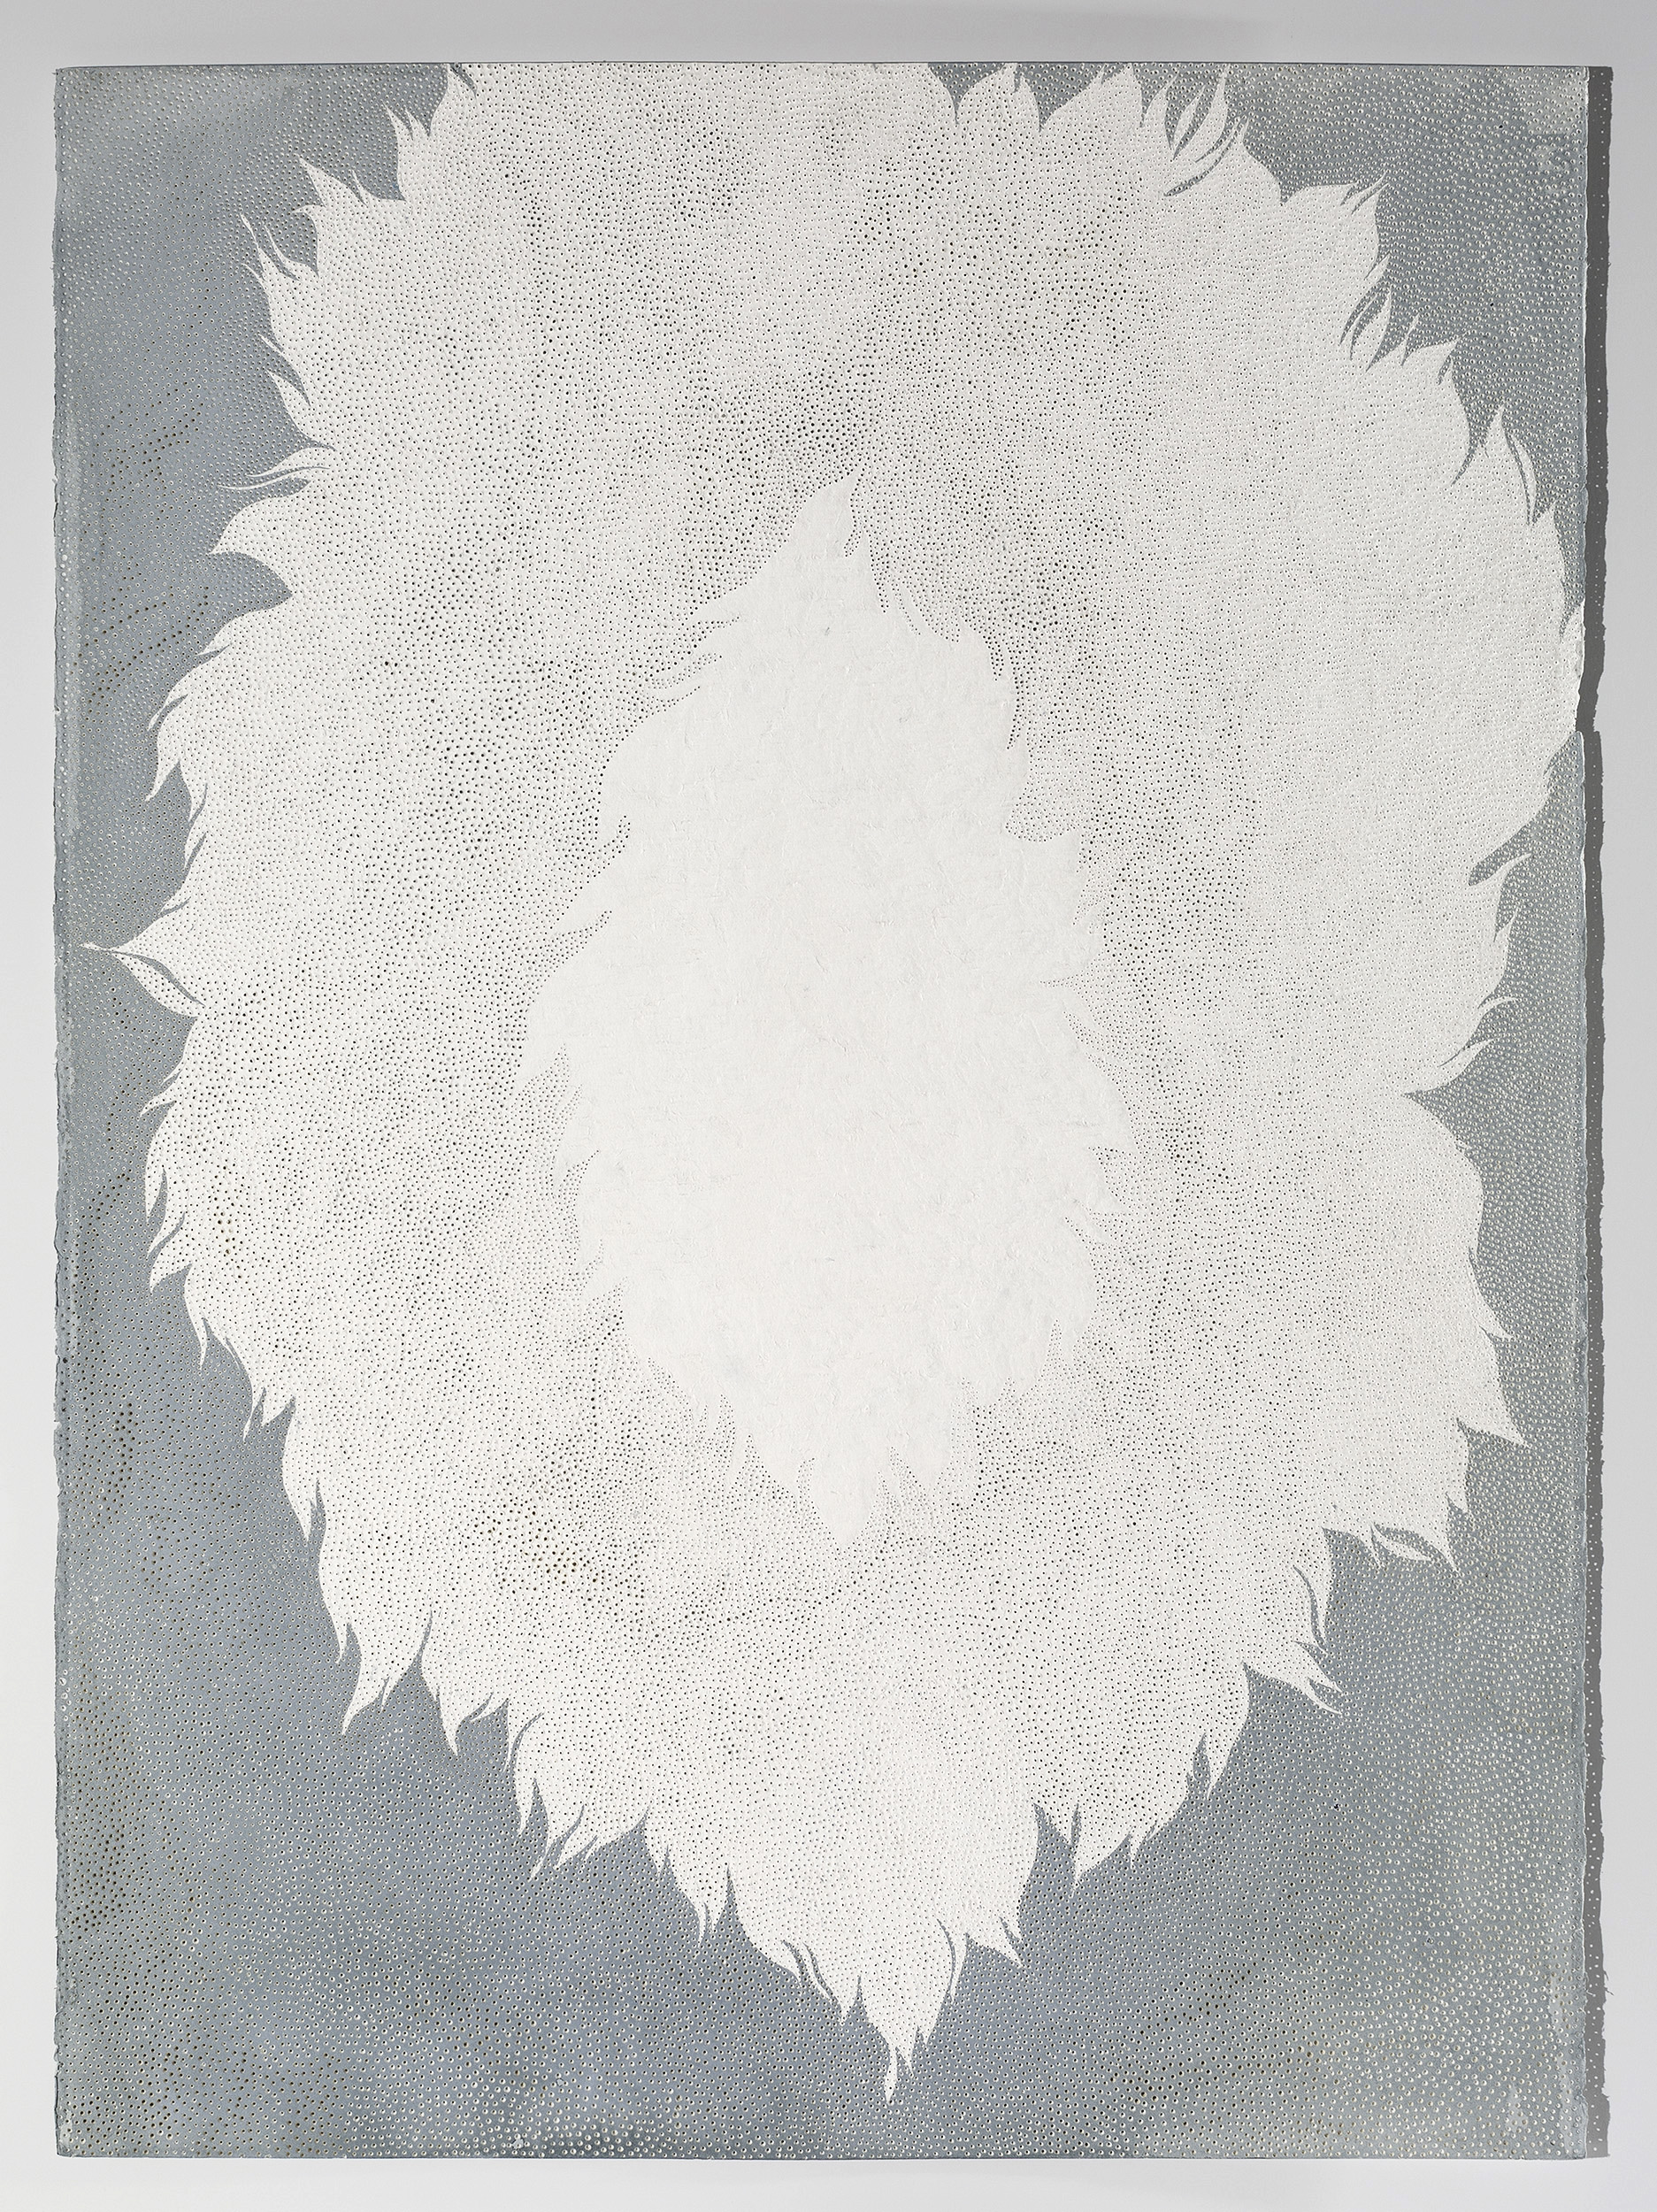 Melinda Schawel 'Let the Light in II' ink on torn perforated paper 105 x 75cm $6,600 SOLD